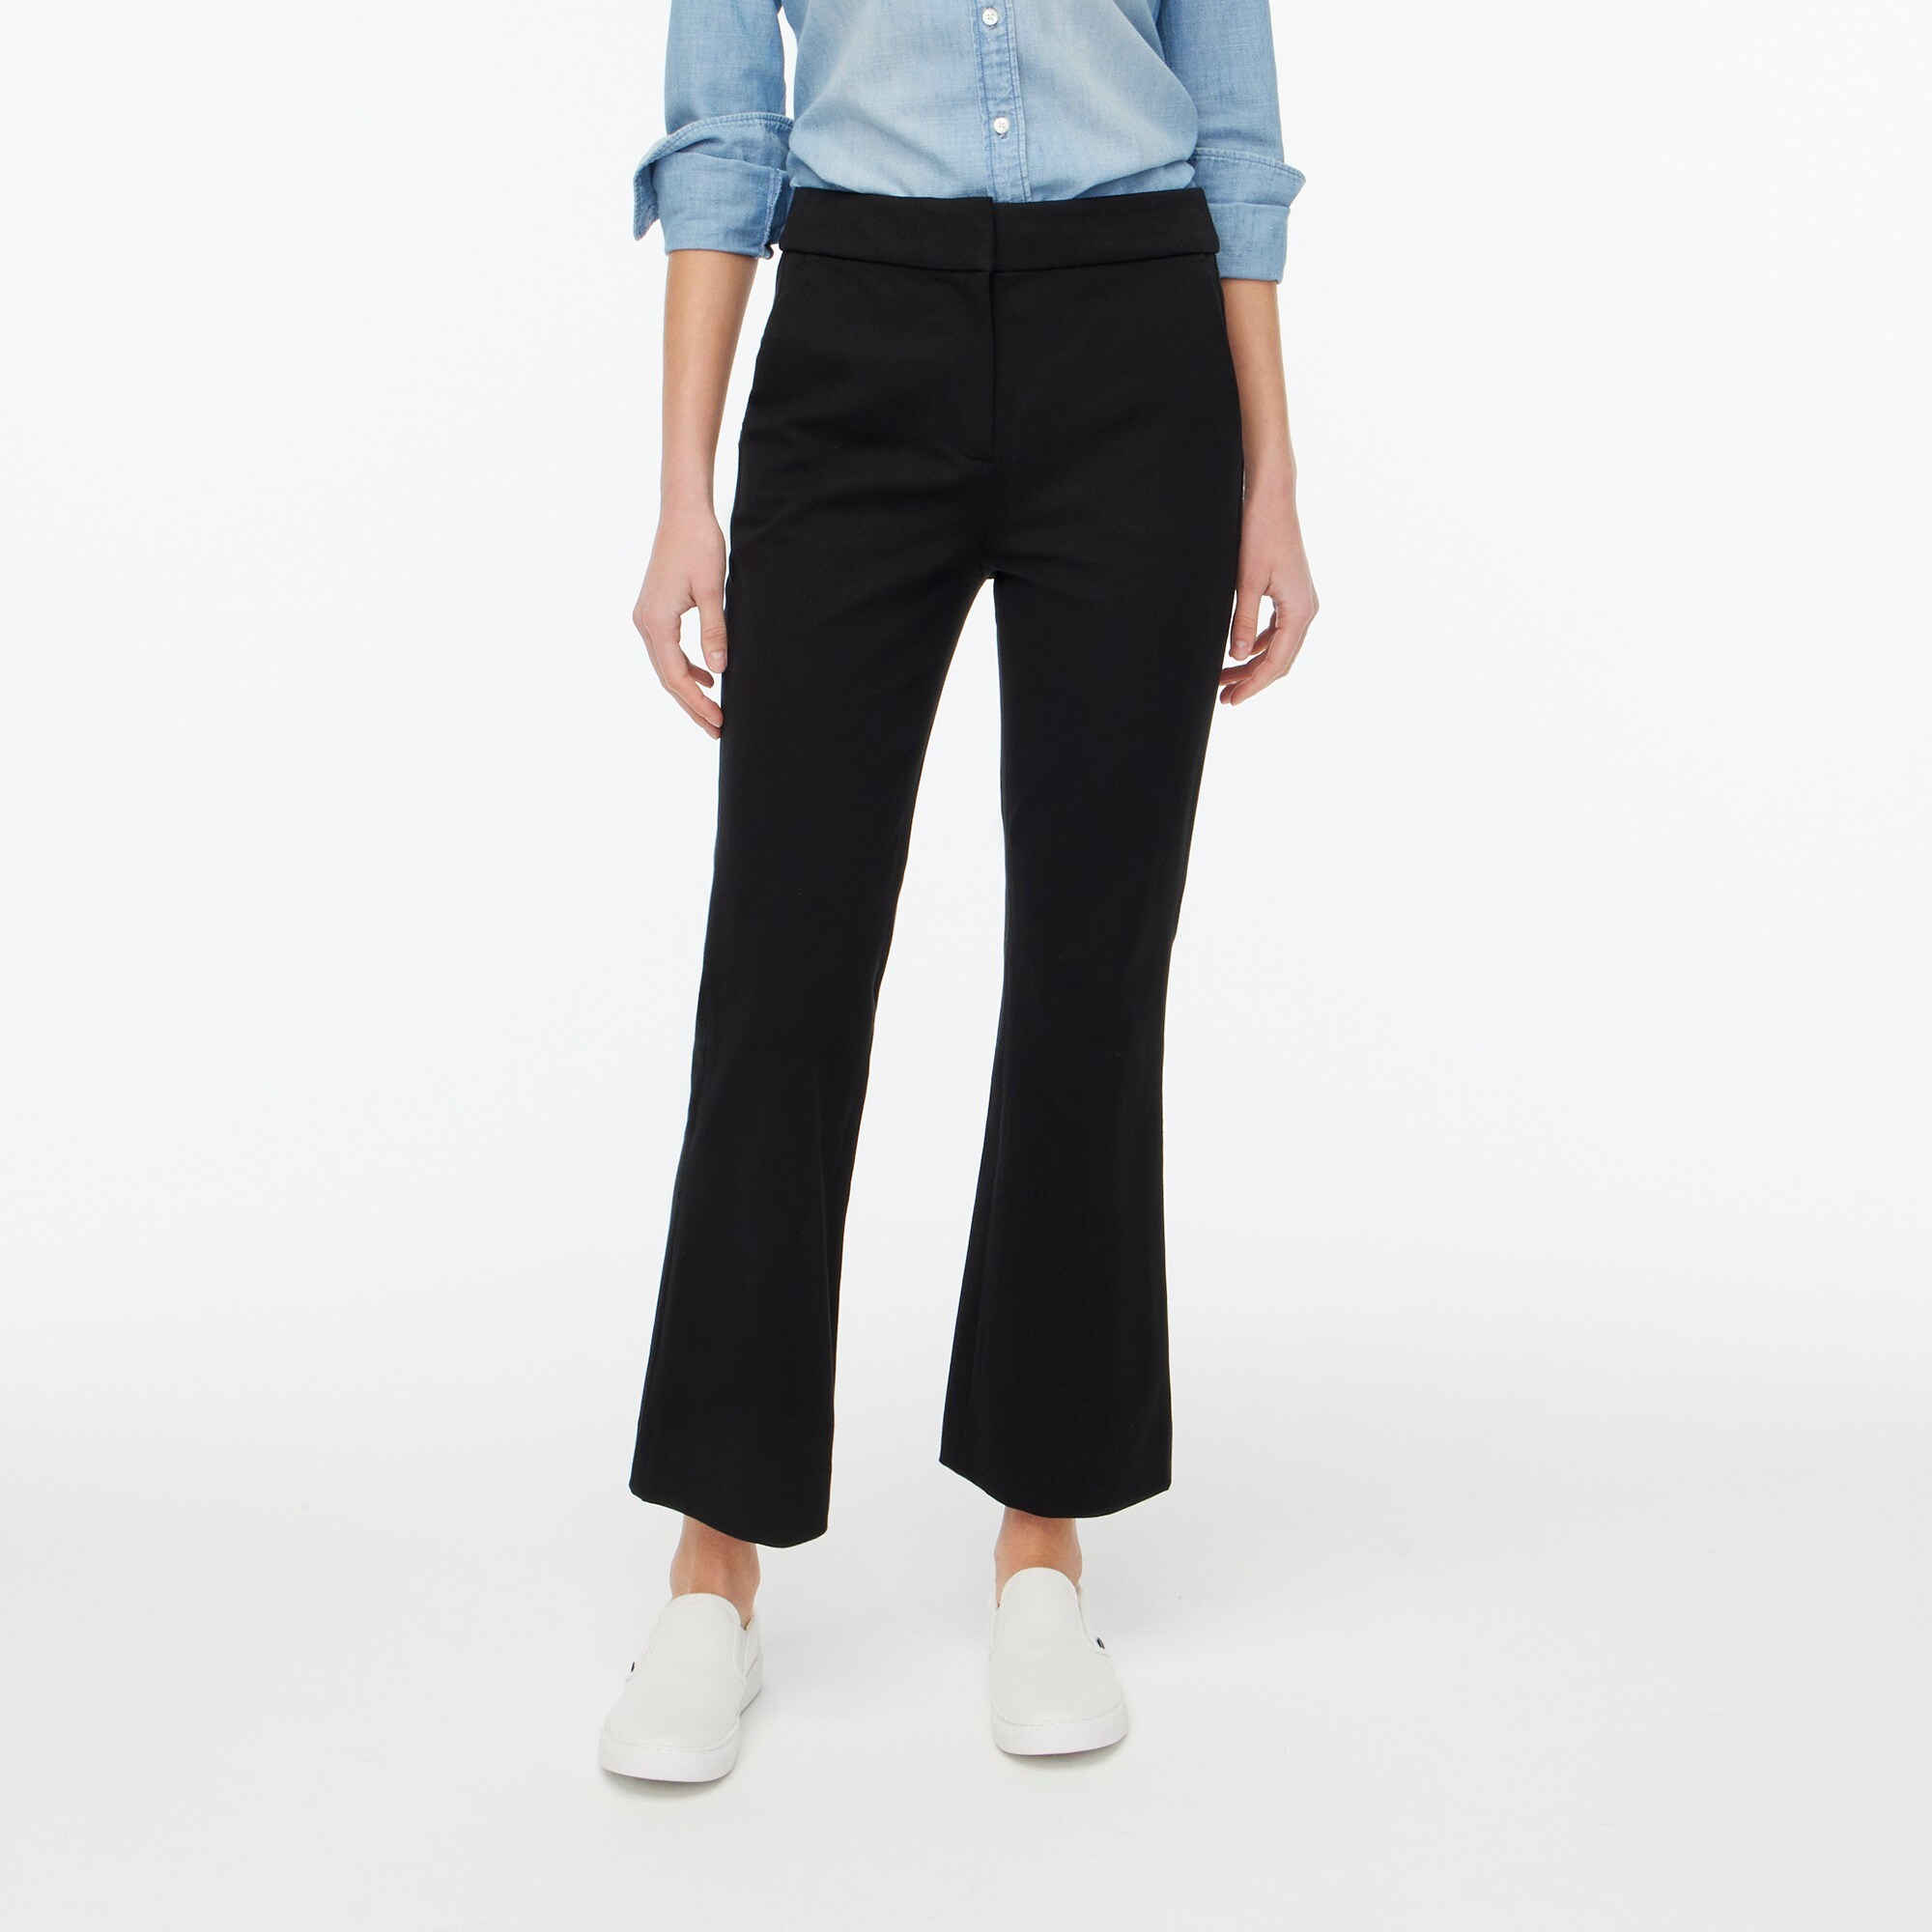  Tall Kelsey cotton-blend flare pant